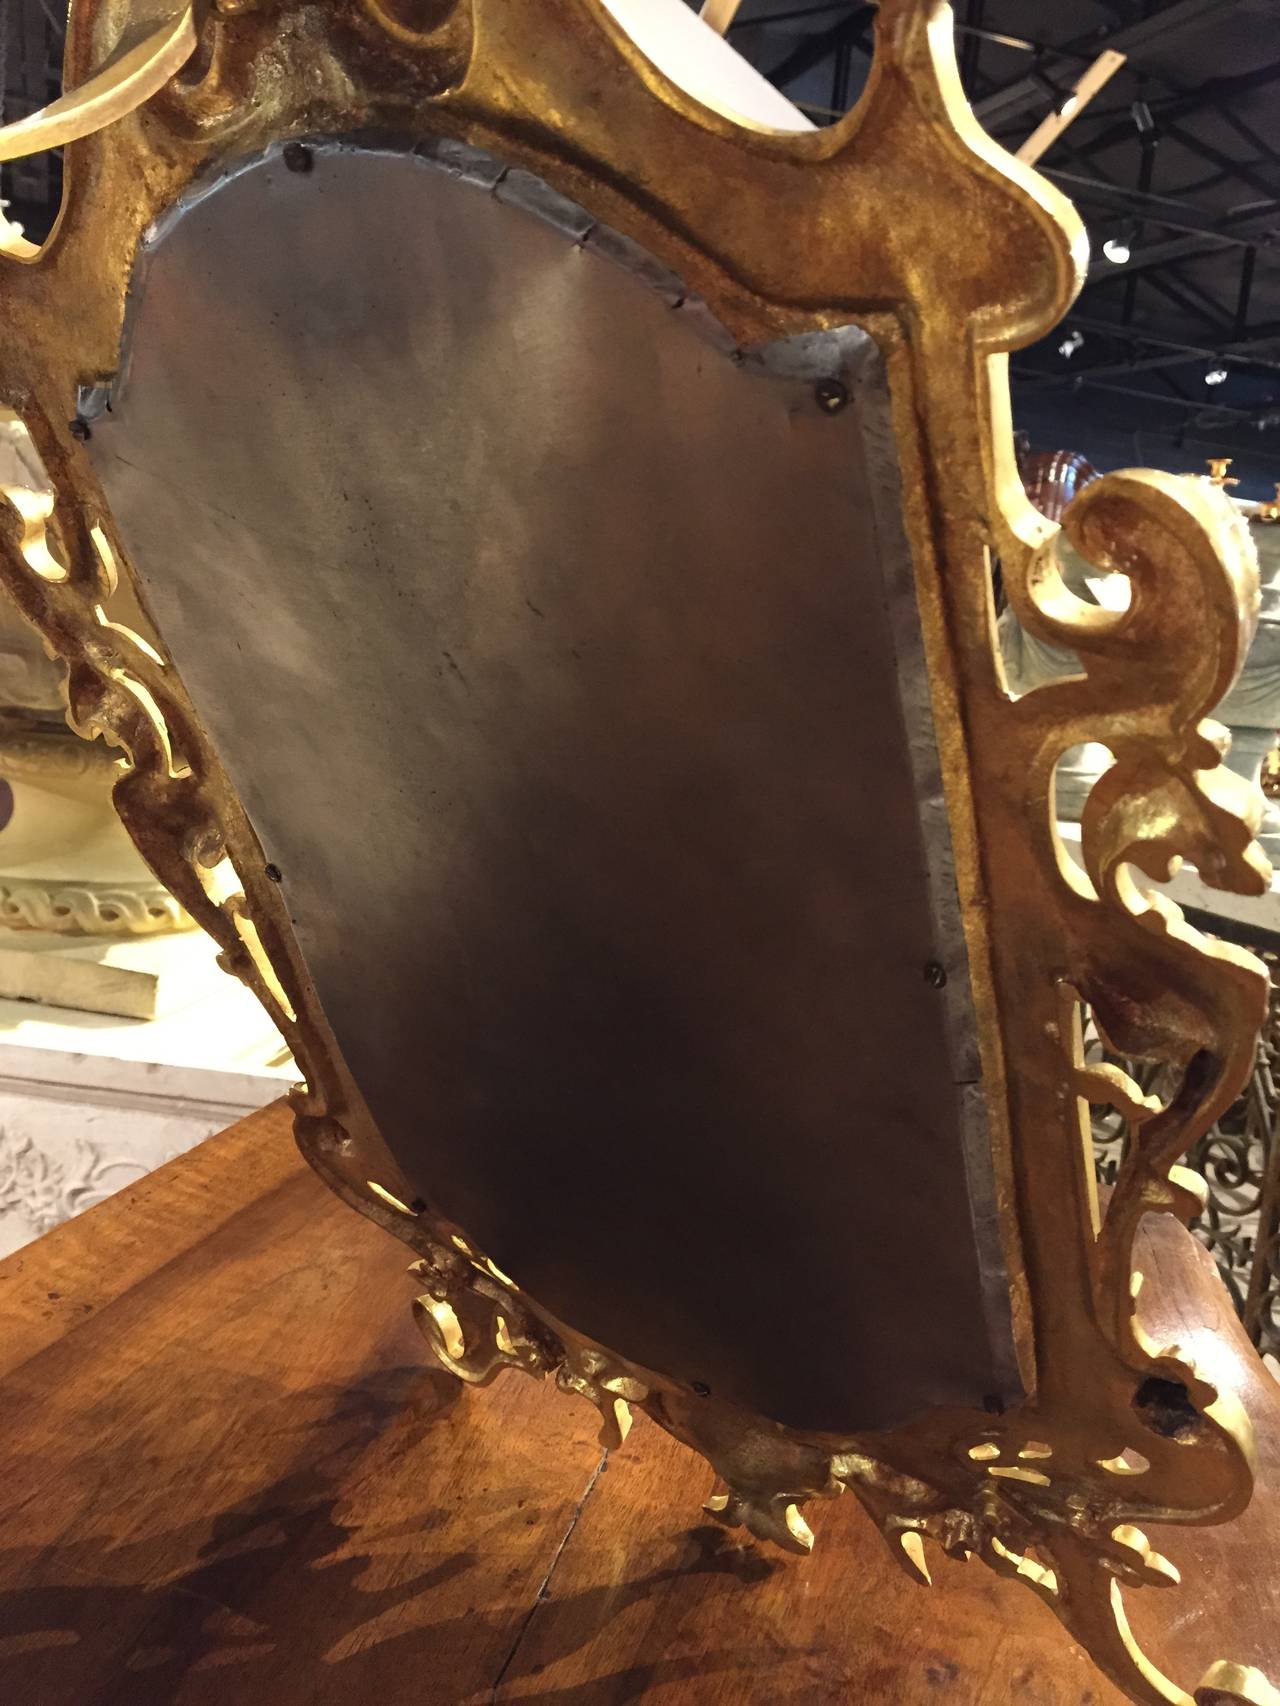 This beautiful bronze table mirror exhibits very refined, chased motifs and dates to the mid 1800s. The interior shape that houses the beveled glass is arched with right angles at the top and bottom. The bronze surrounding this has a myriad of